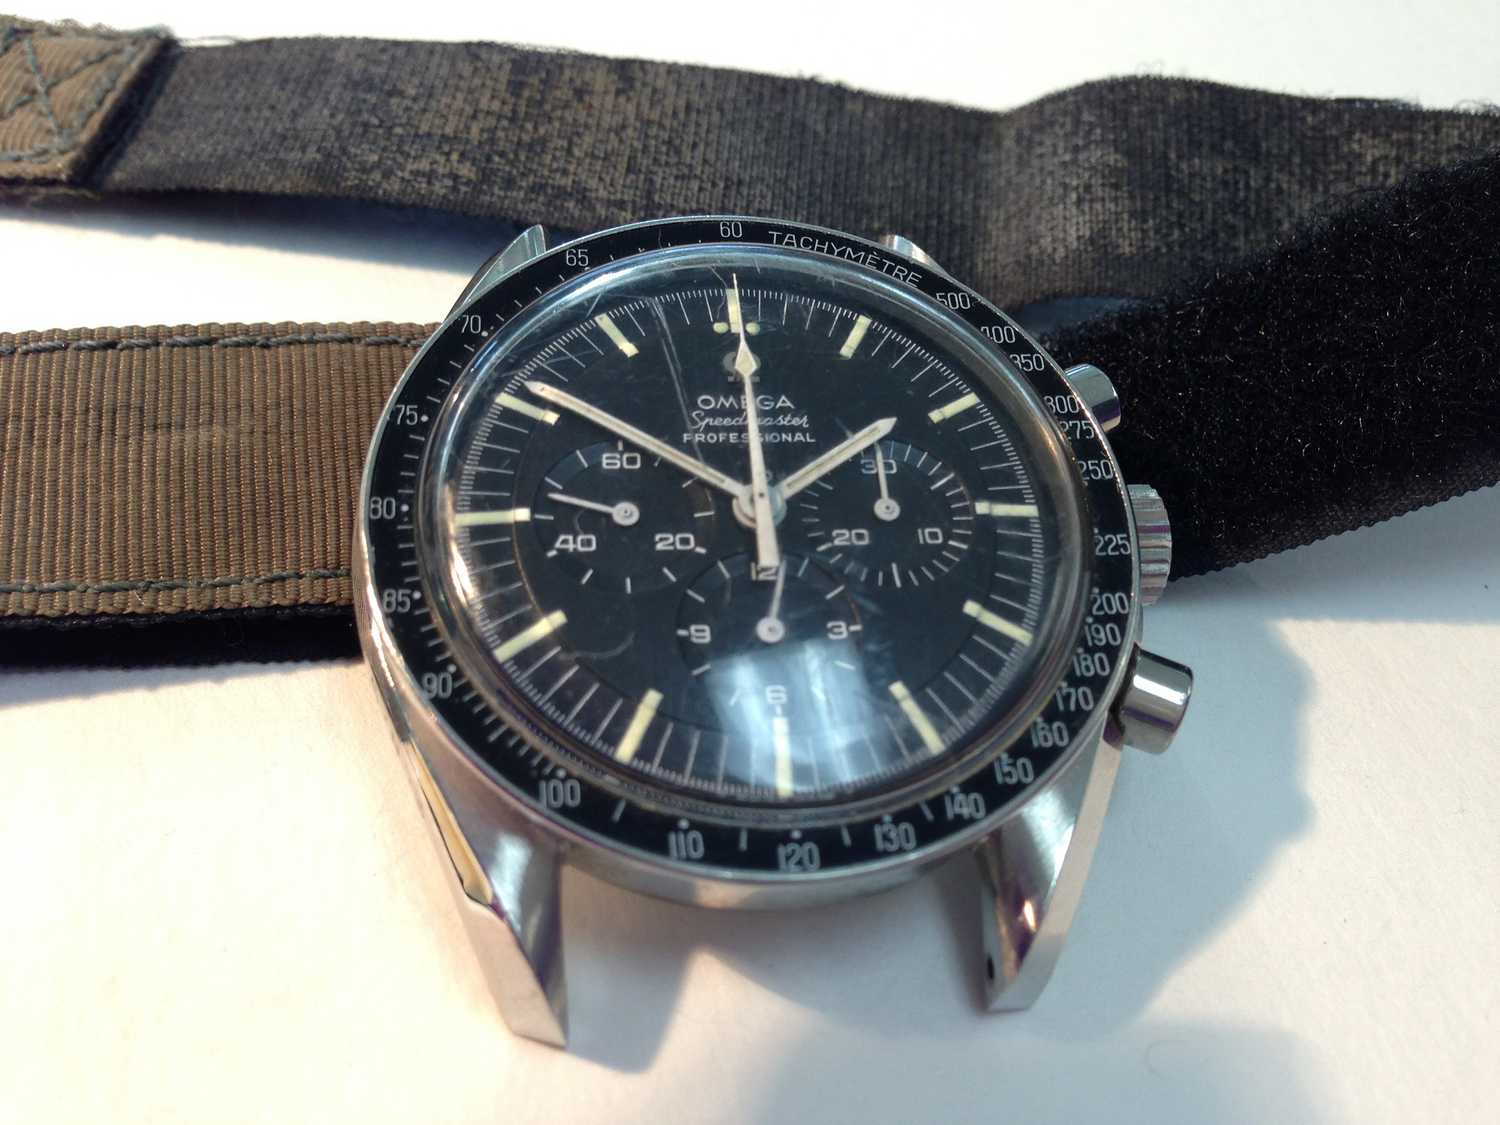 This Omega Speedmaster Chronograph was issued to astronaut Michael Collins for use during the Apollo 11 mission of July 1969.